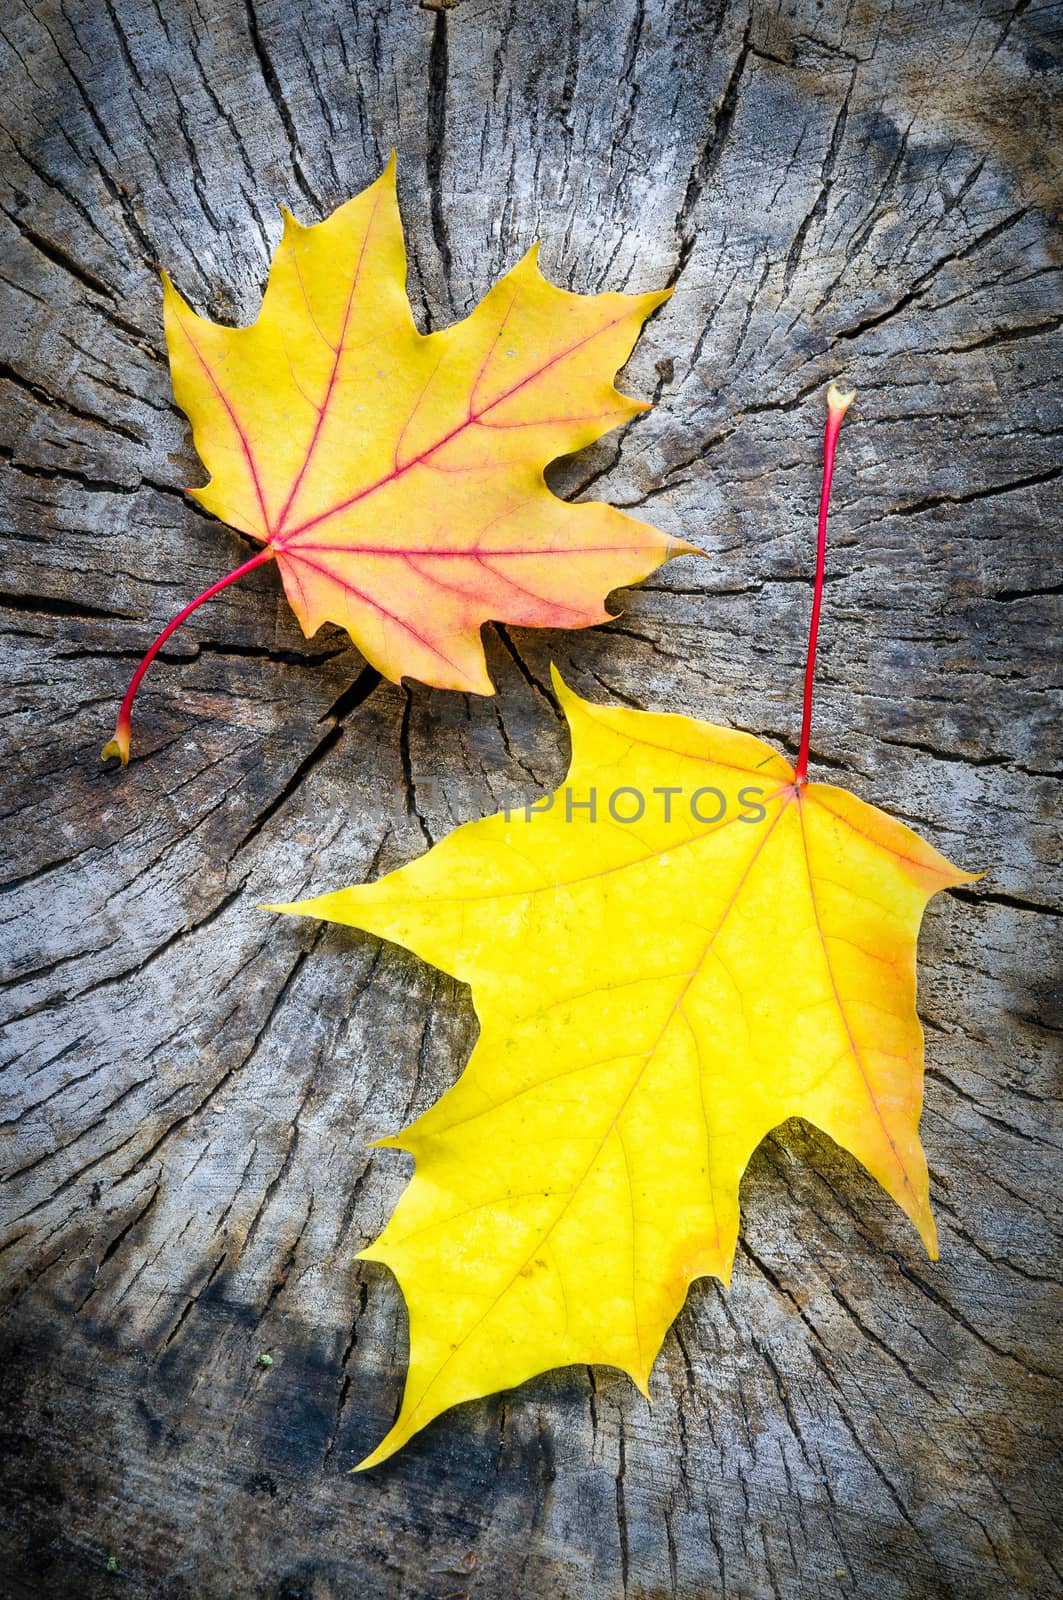 Red, orange and yellow maple leaf on a cut trunk, in the forest in autumn